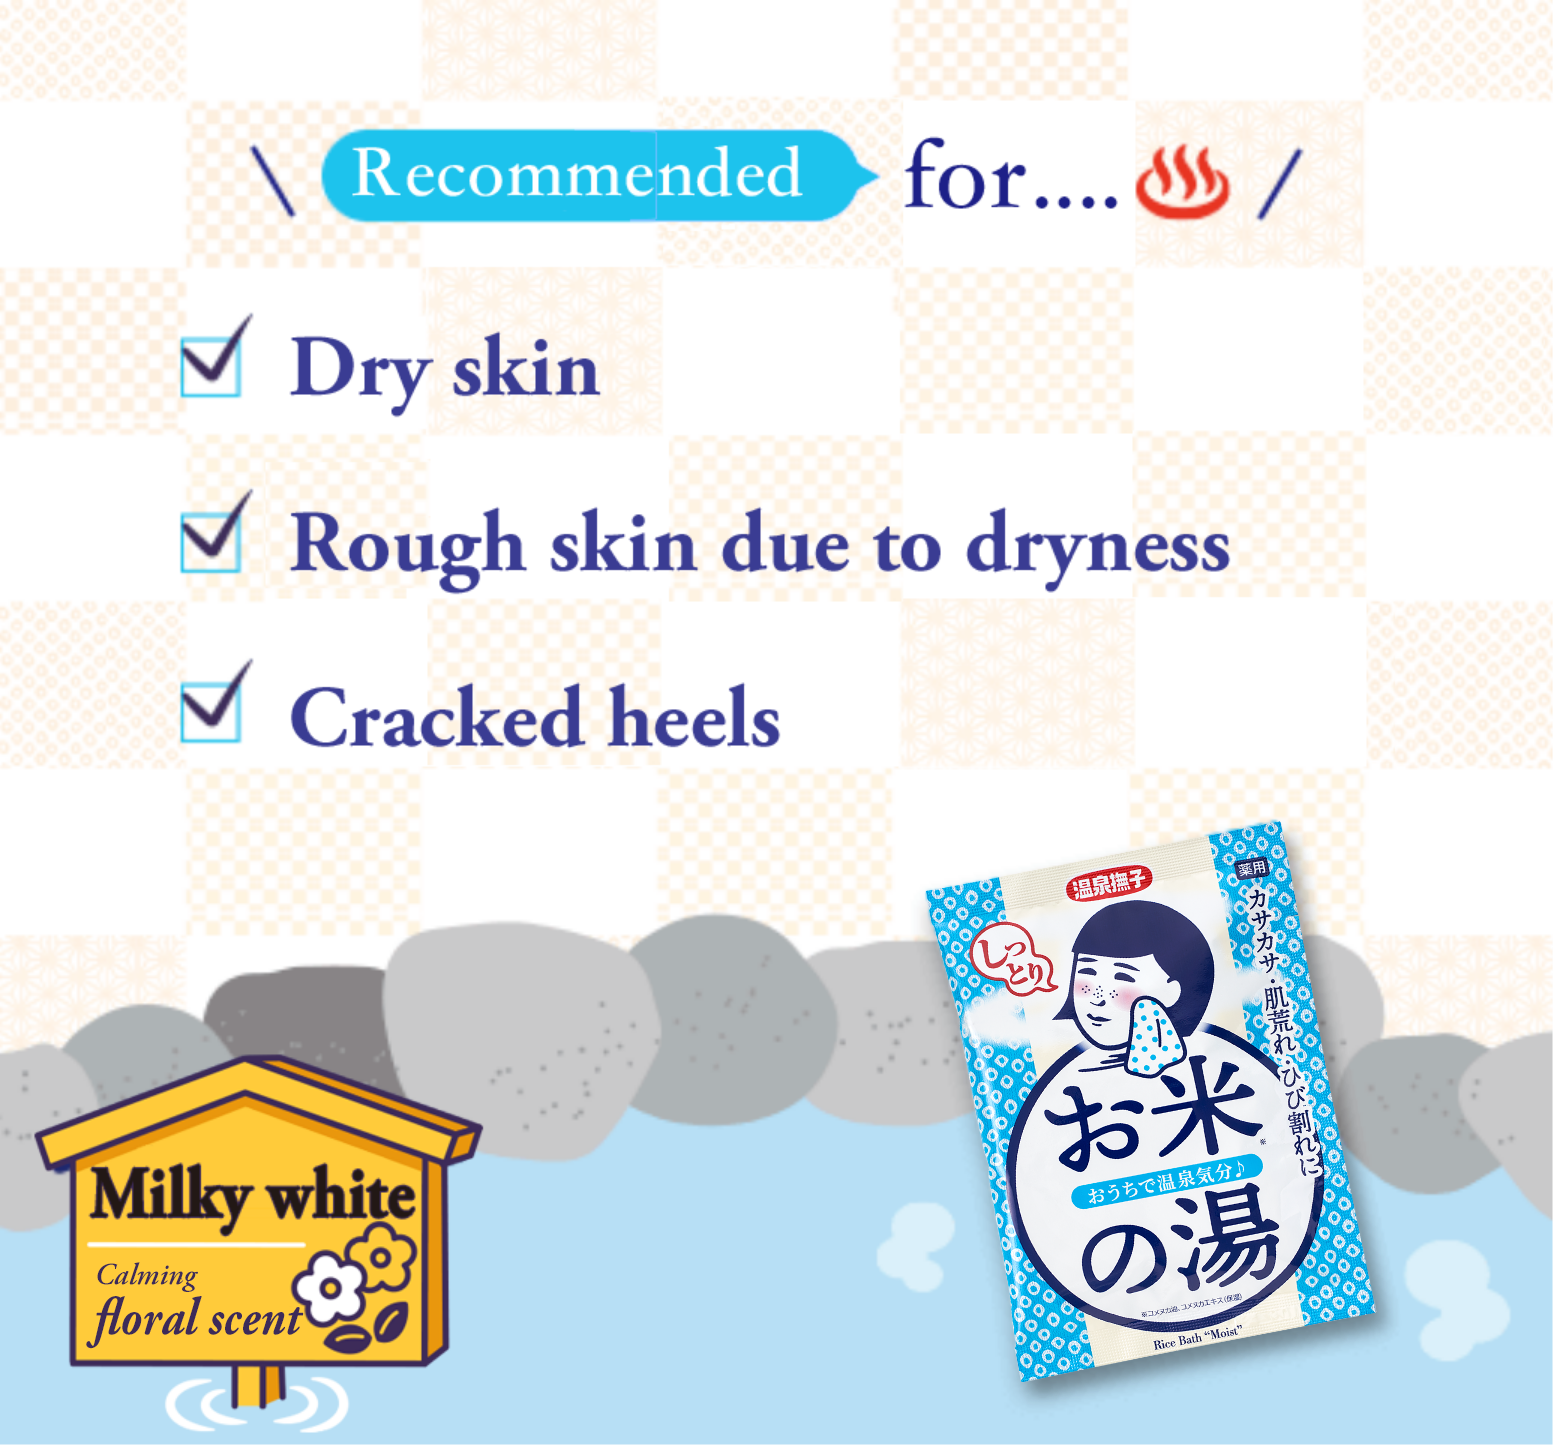 Dry skin, Rough skin due to dryness, Cracked heels